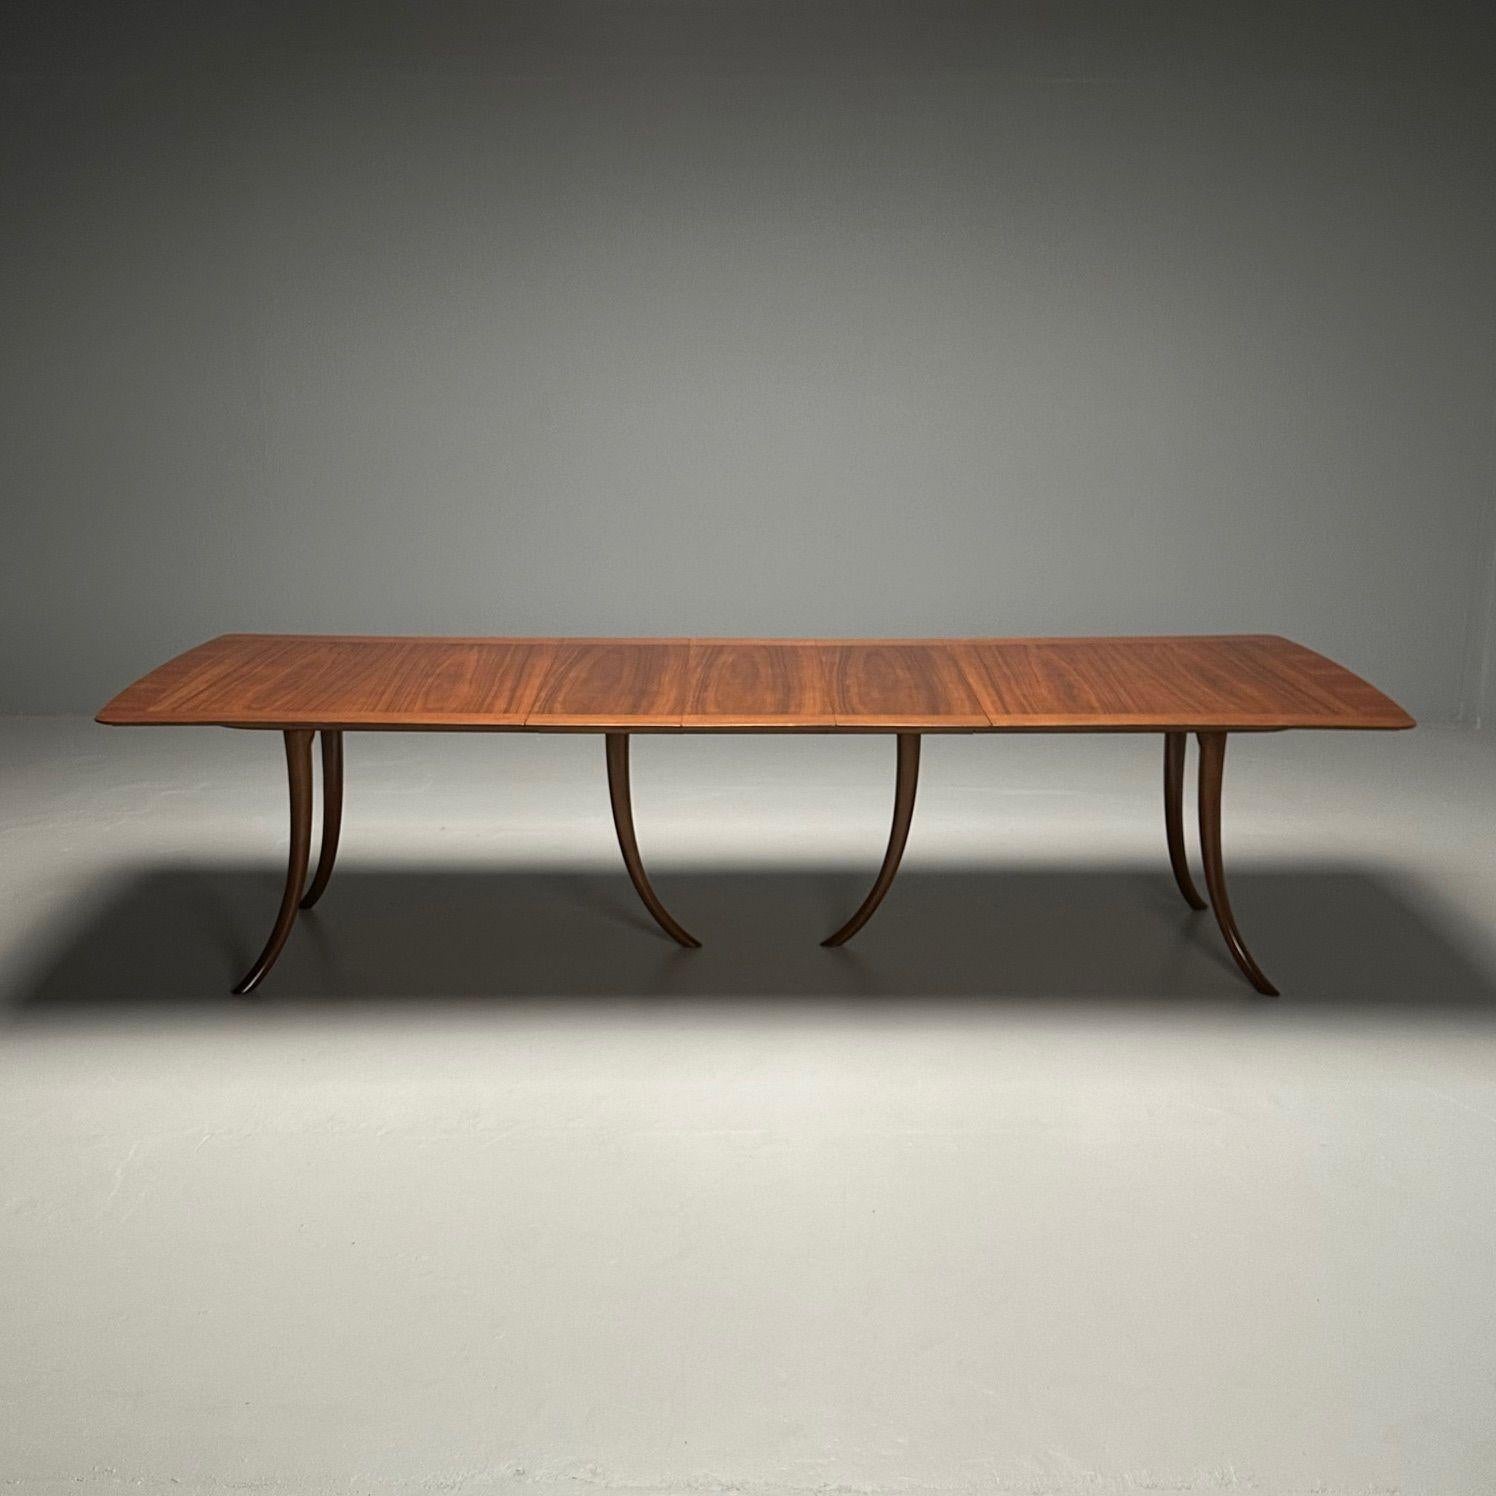 T.H. Robsjohn-Gibbings, Widdicomb, American Mid-Century Modern, Saber Leg Dining Table, Walnut, 1956

Rare example of a 'Saber Tooth' dining table designed by T.H. Robsjohn-Gibbings for Widdicomb and produced in the United States dated 1956.